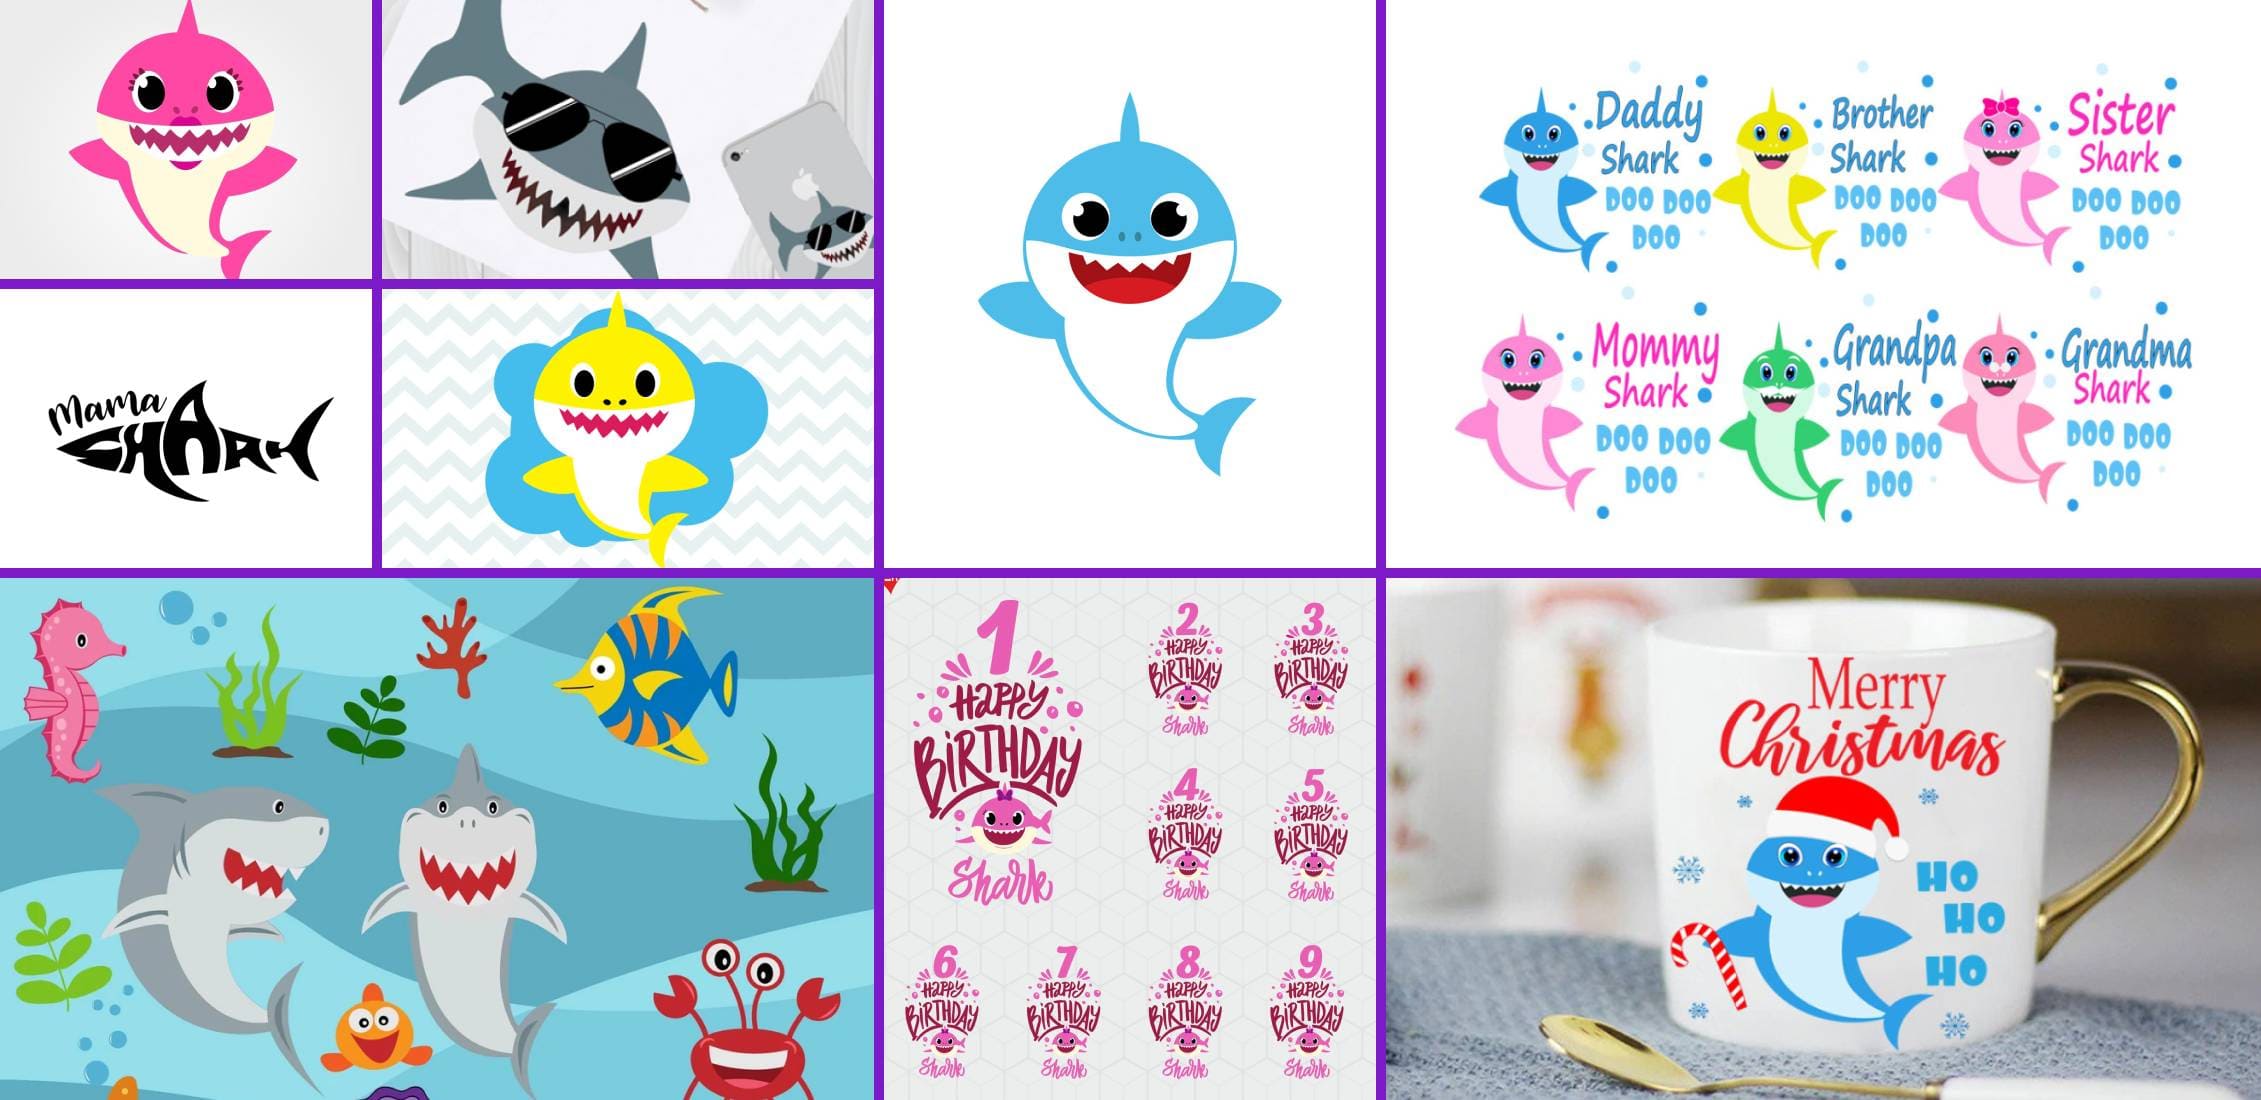 Baby Shark SVG Images Example.